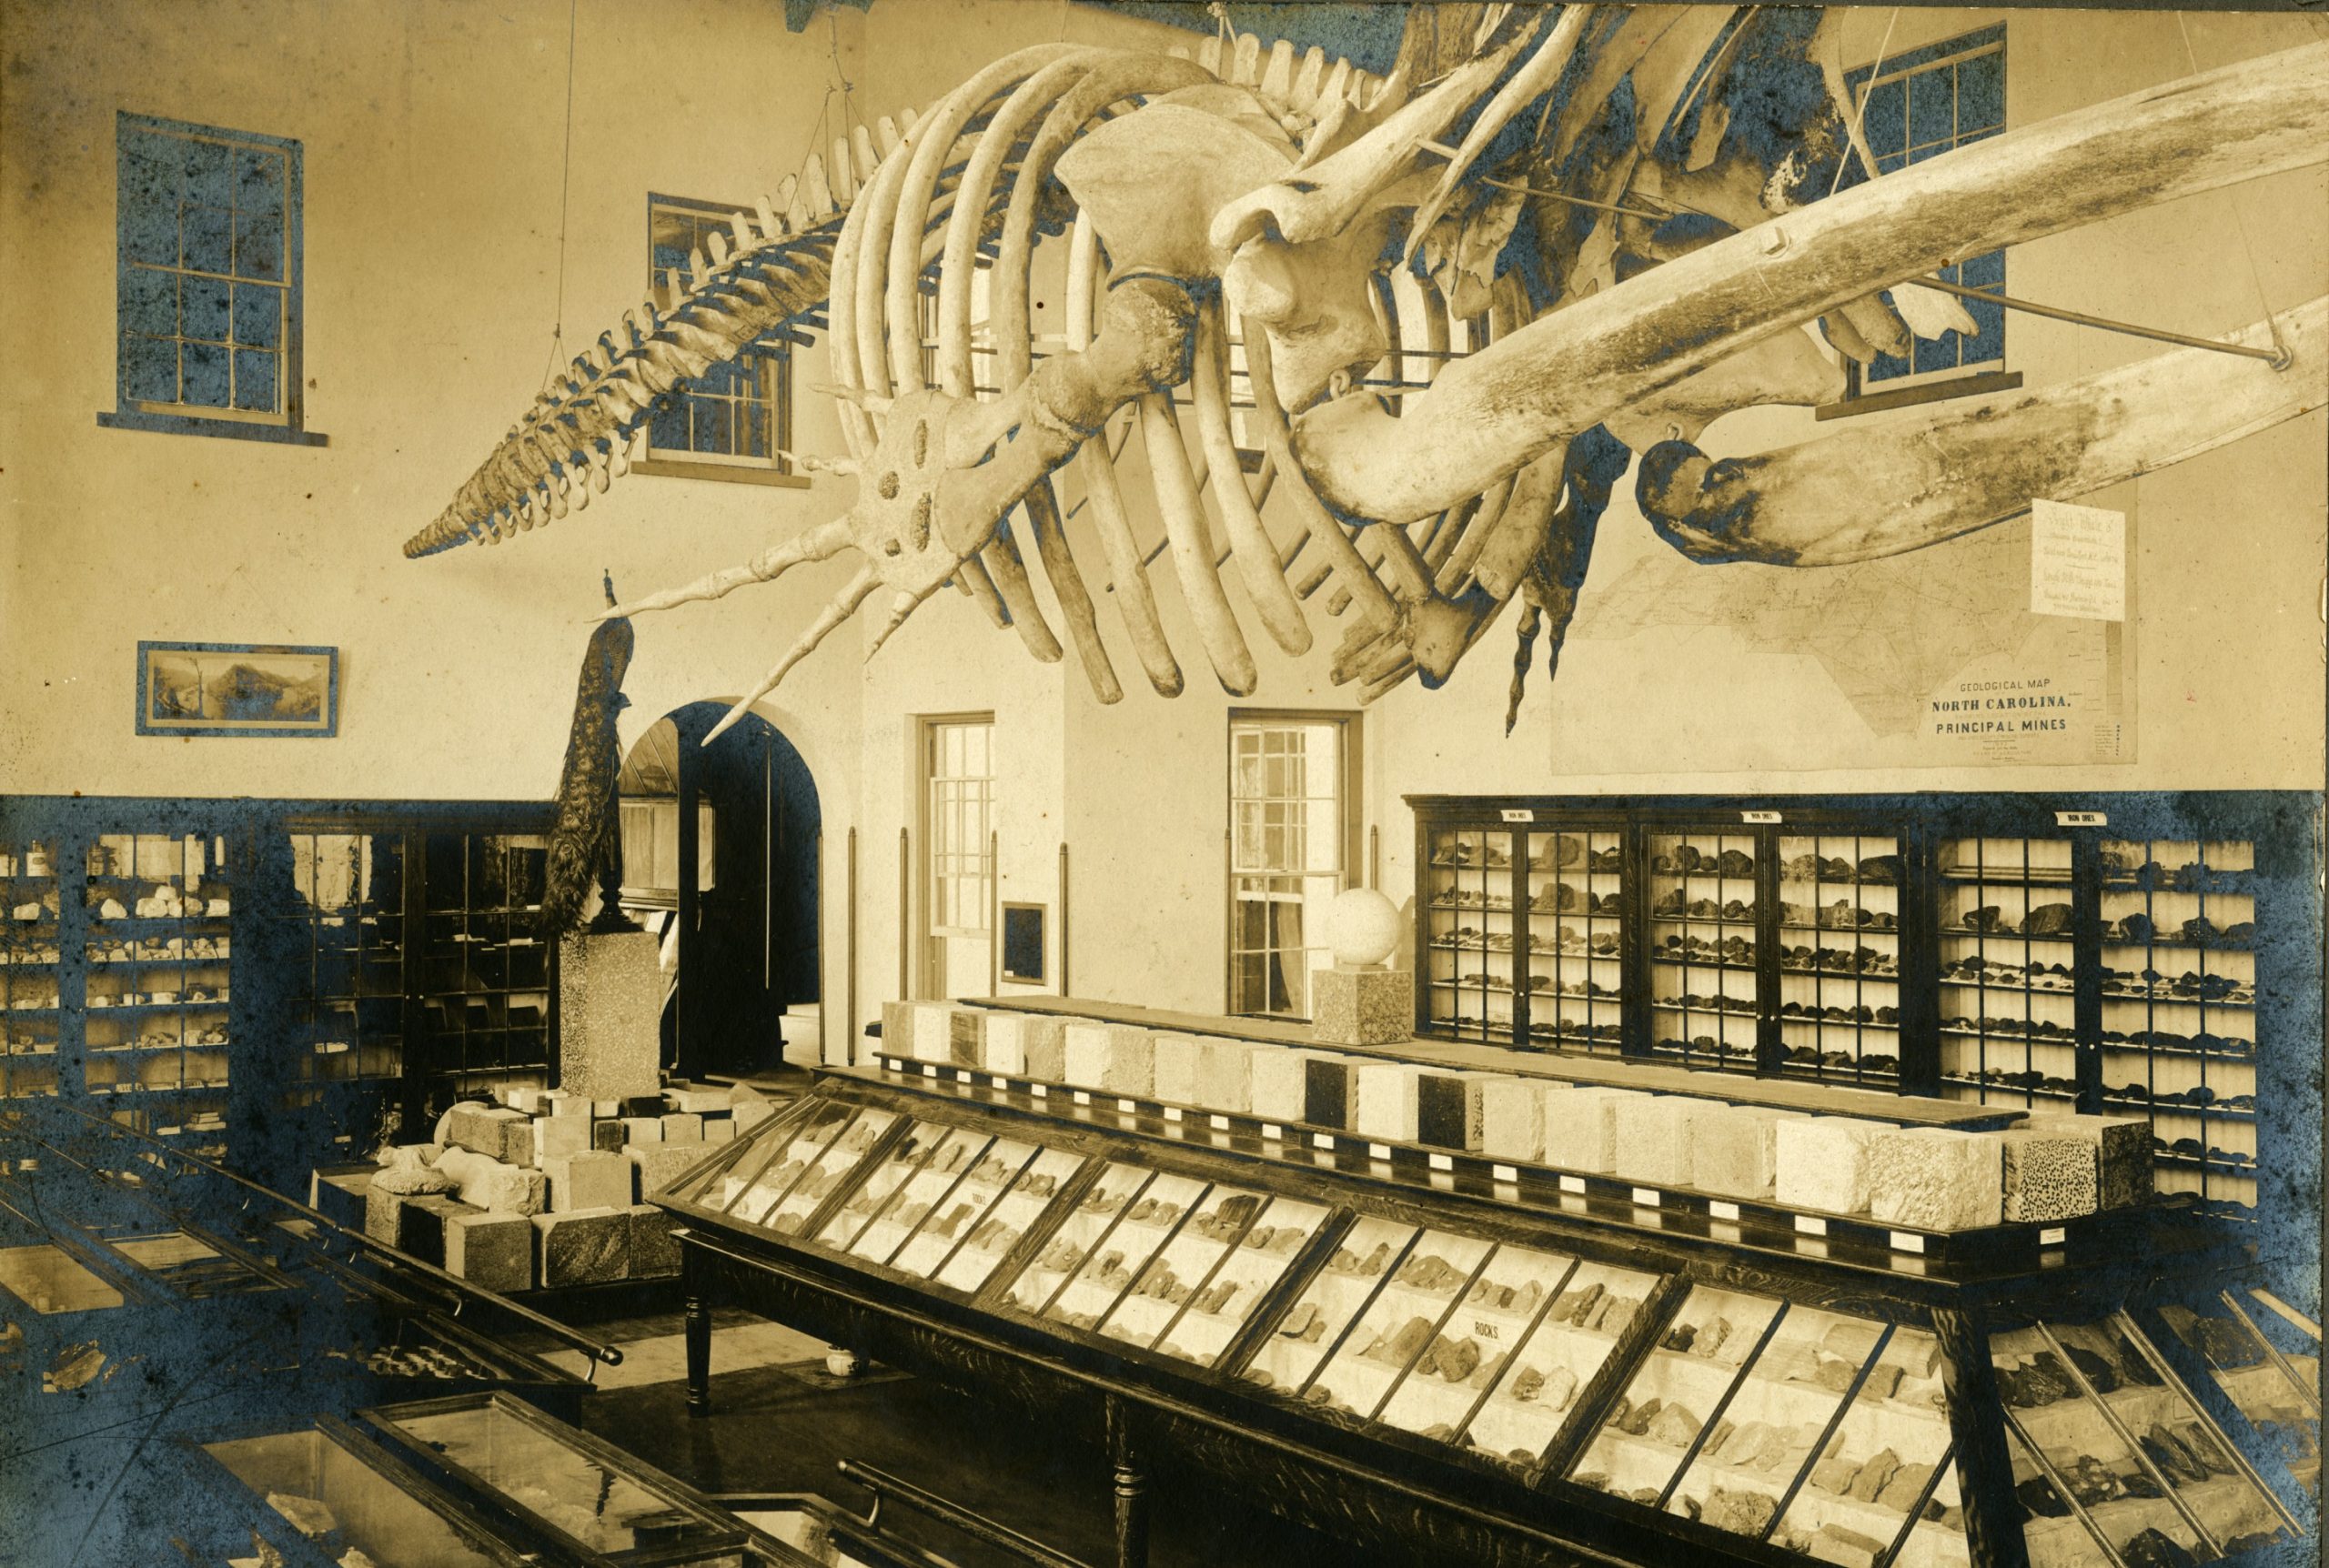 whale skeleton suspended over display cases